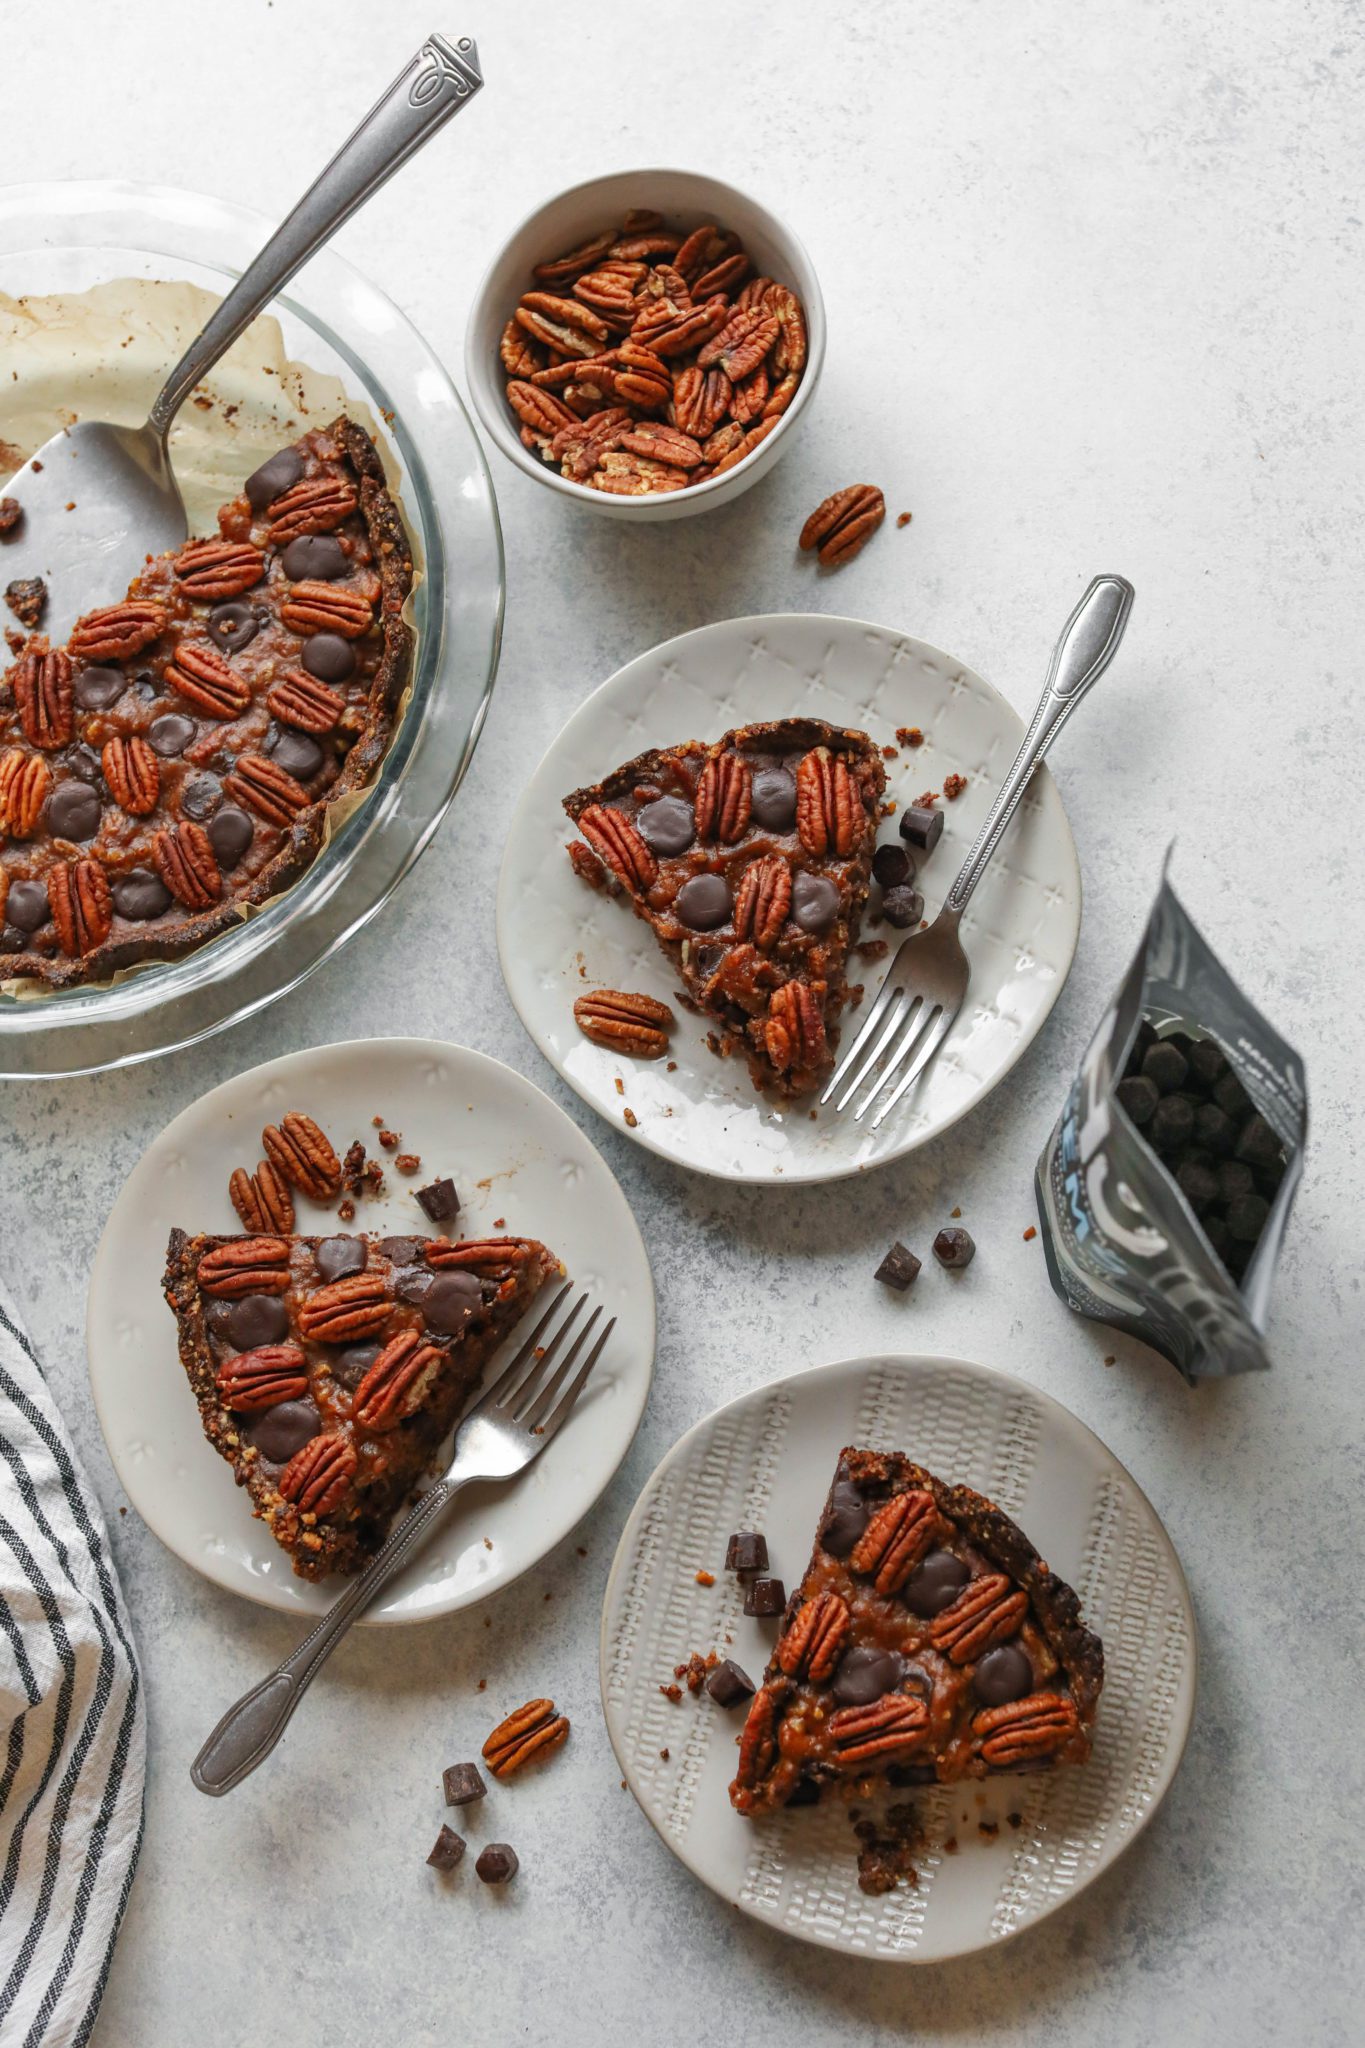 Vegan Dark Chocolate Pecan Pie sliced and plated with forks by Flora & Vino